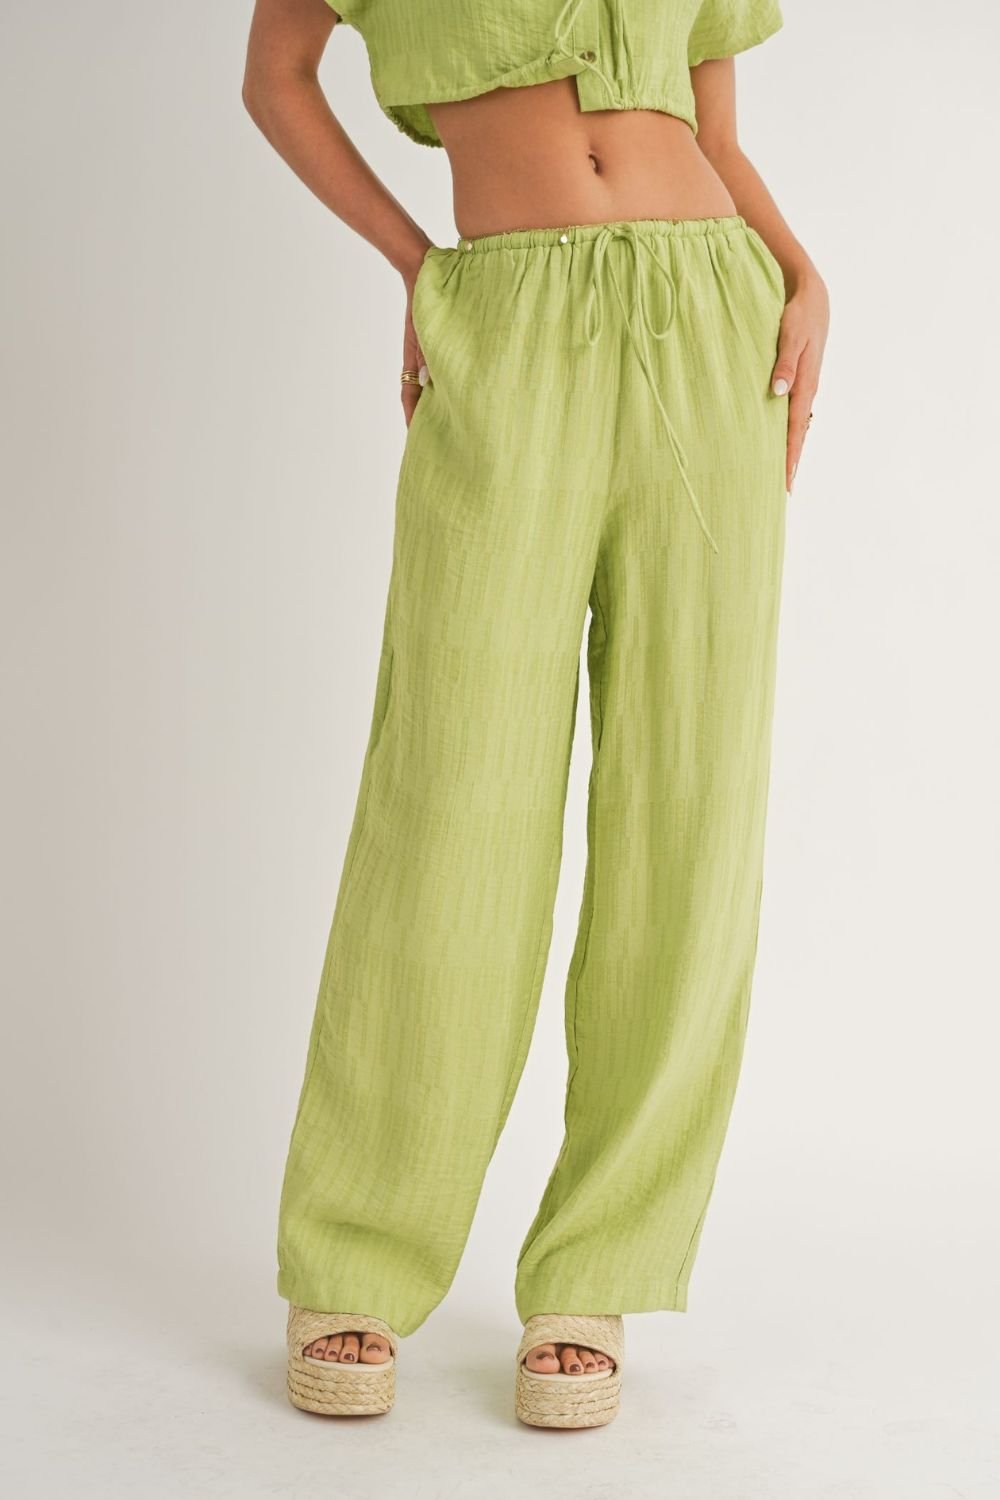 Women's A Tini Summer Set | Wide Leg Pants | Lime Green - Women's Pants - Blooming Daily